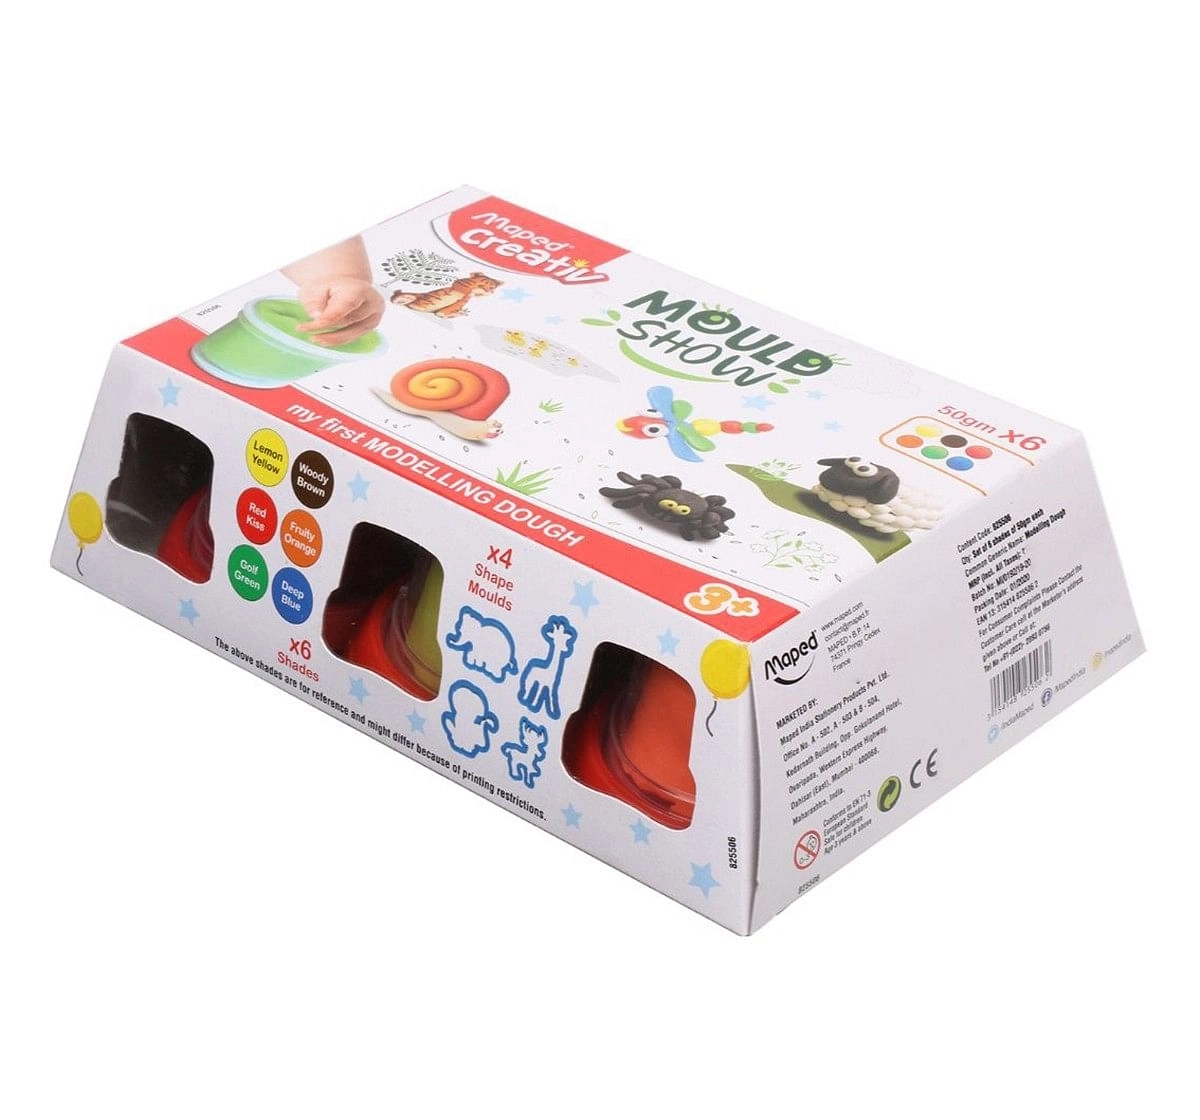 Maped Maped Colorpeps Modelling Dough 6, 7Y+ (Multicolour)